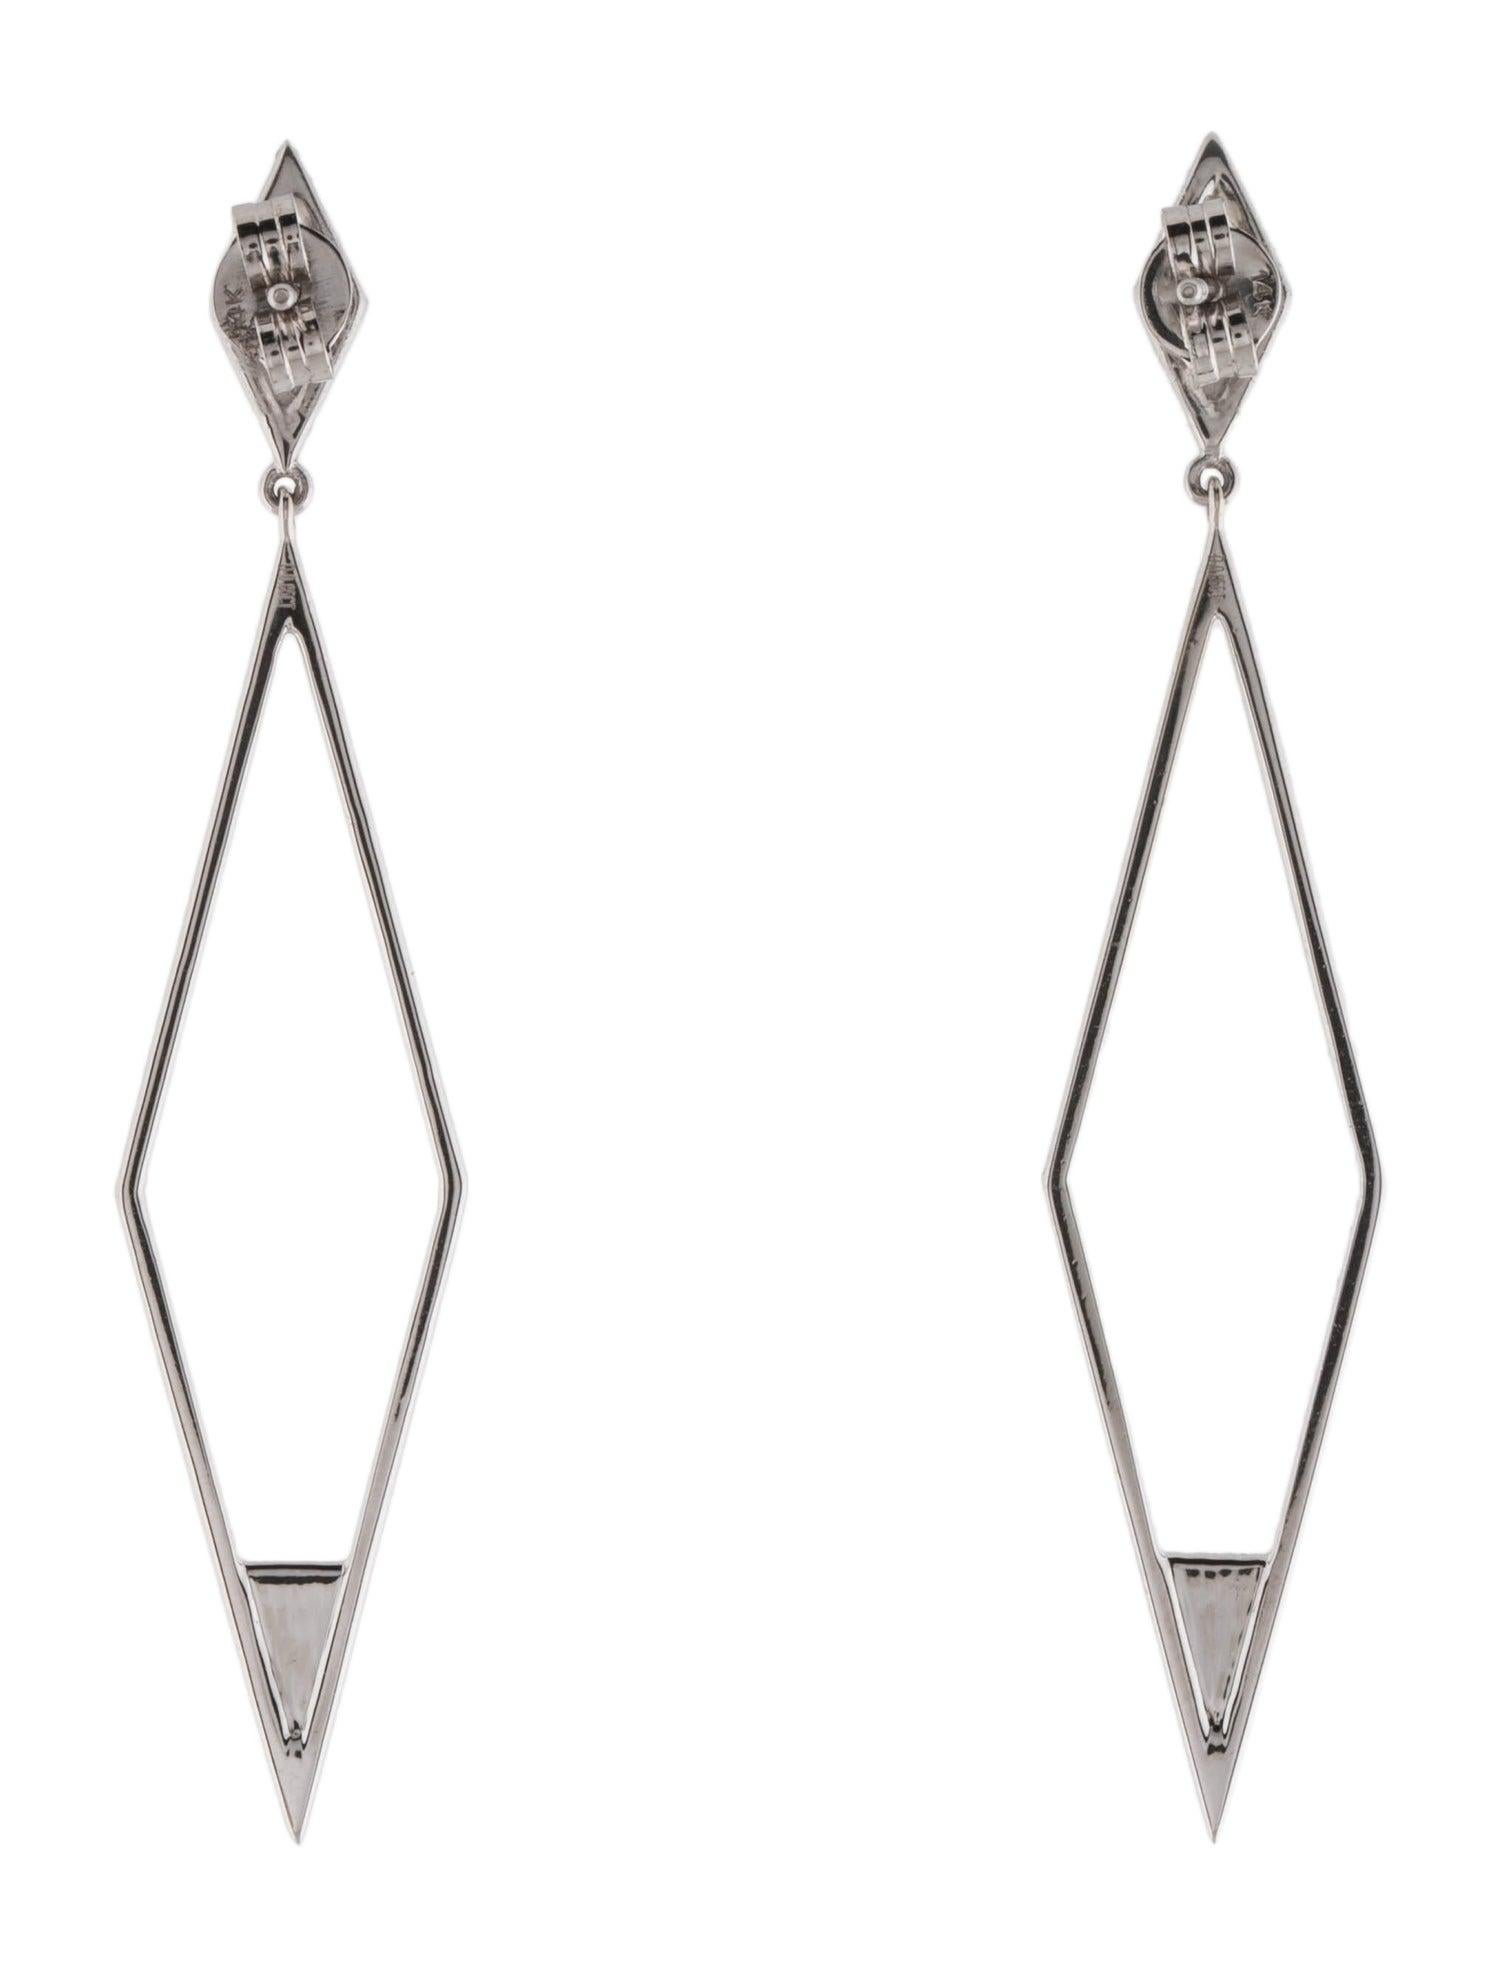 Round Cut Luxurious 14K White Gold Diamond Drop Earrings - 0.85ct Round Brilliant Cut For Sale